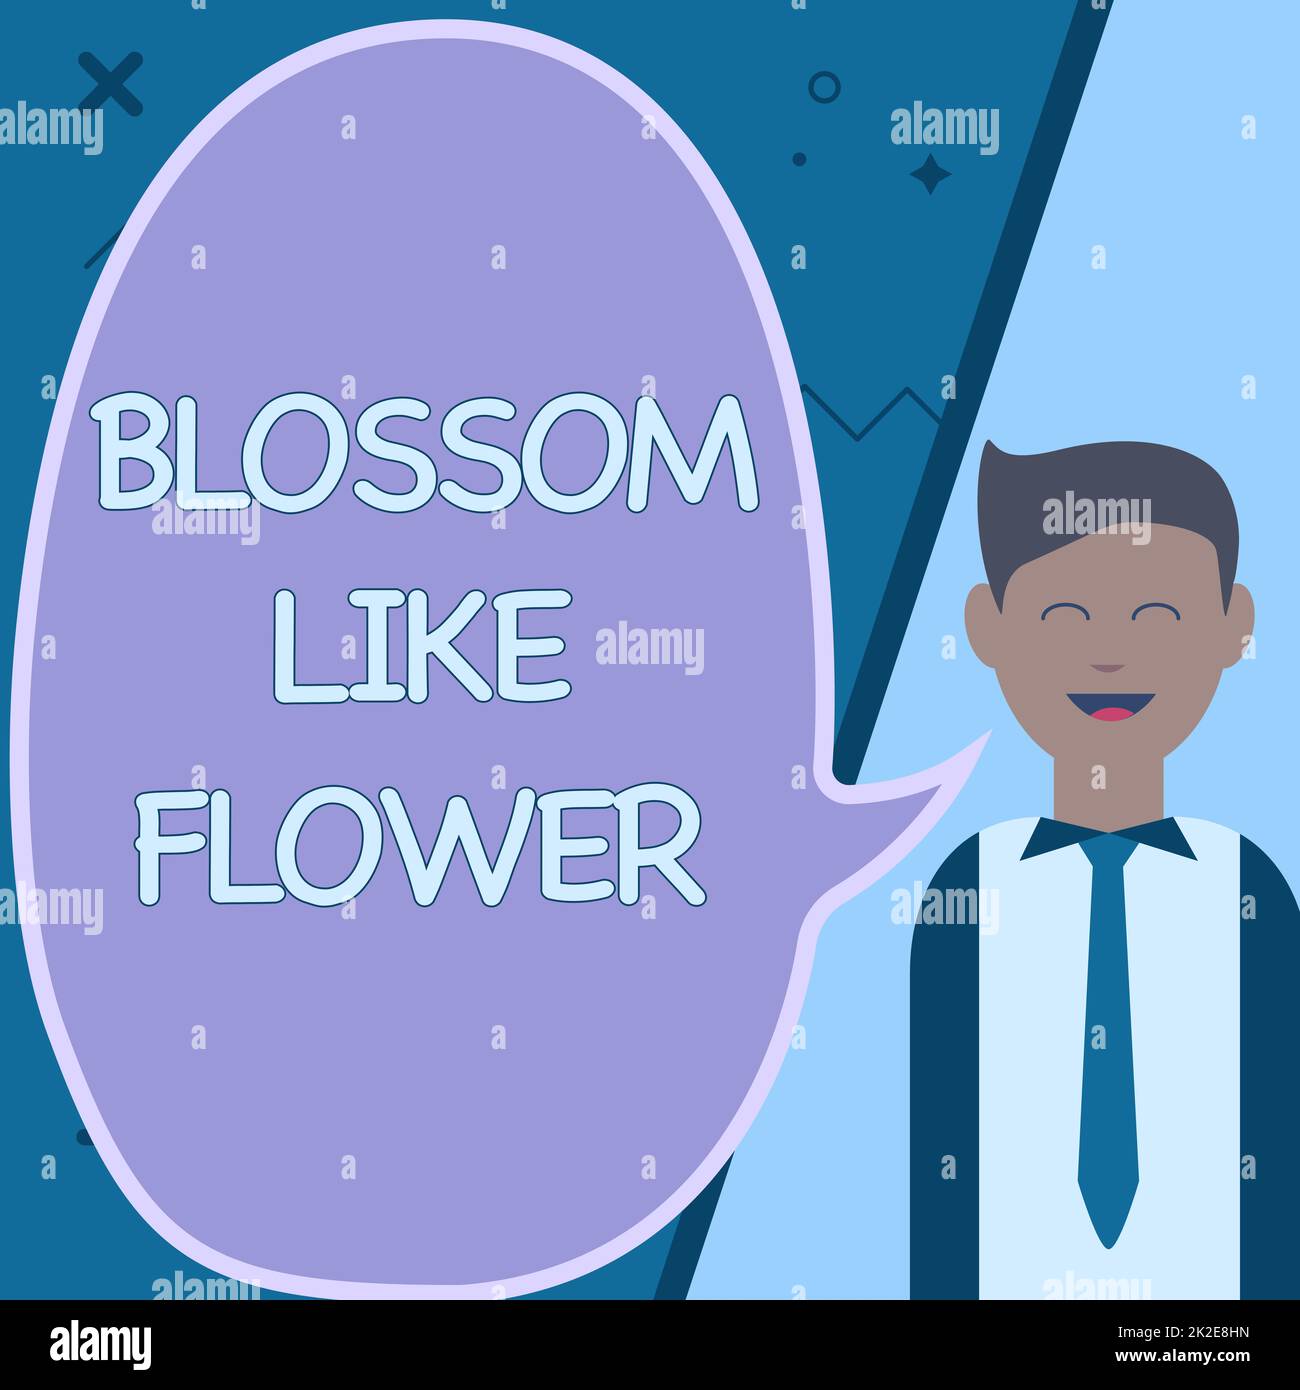 Writing displaying text Blossom Like Flower. Business idea plant or tree that will form the seeds or fruit Illustration Of Businessman Presenting Ideas To Empty Chat Cloud. Stock Photo